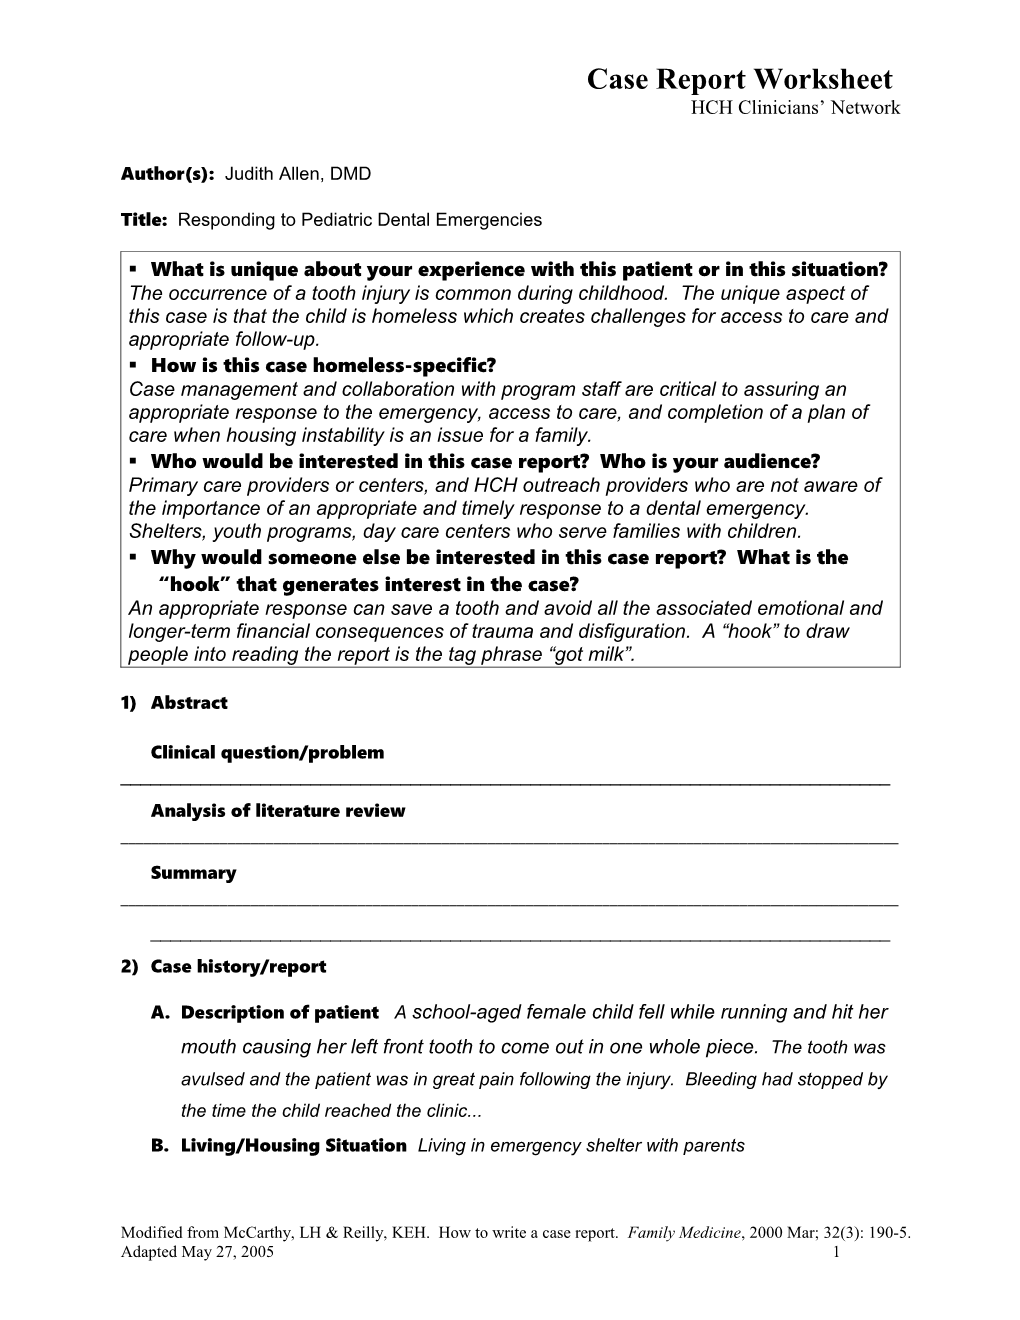 Case Report Worksheet (Content of a Case Report)